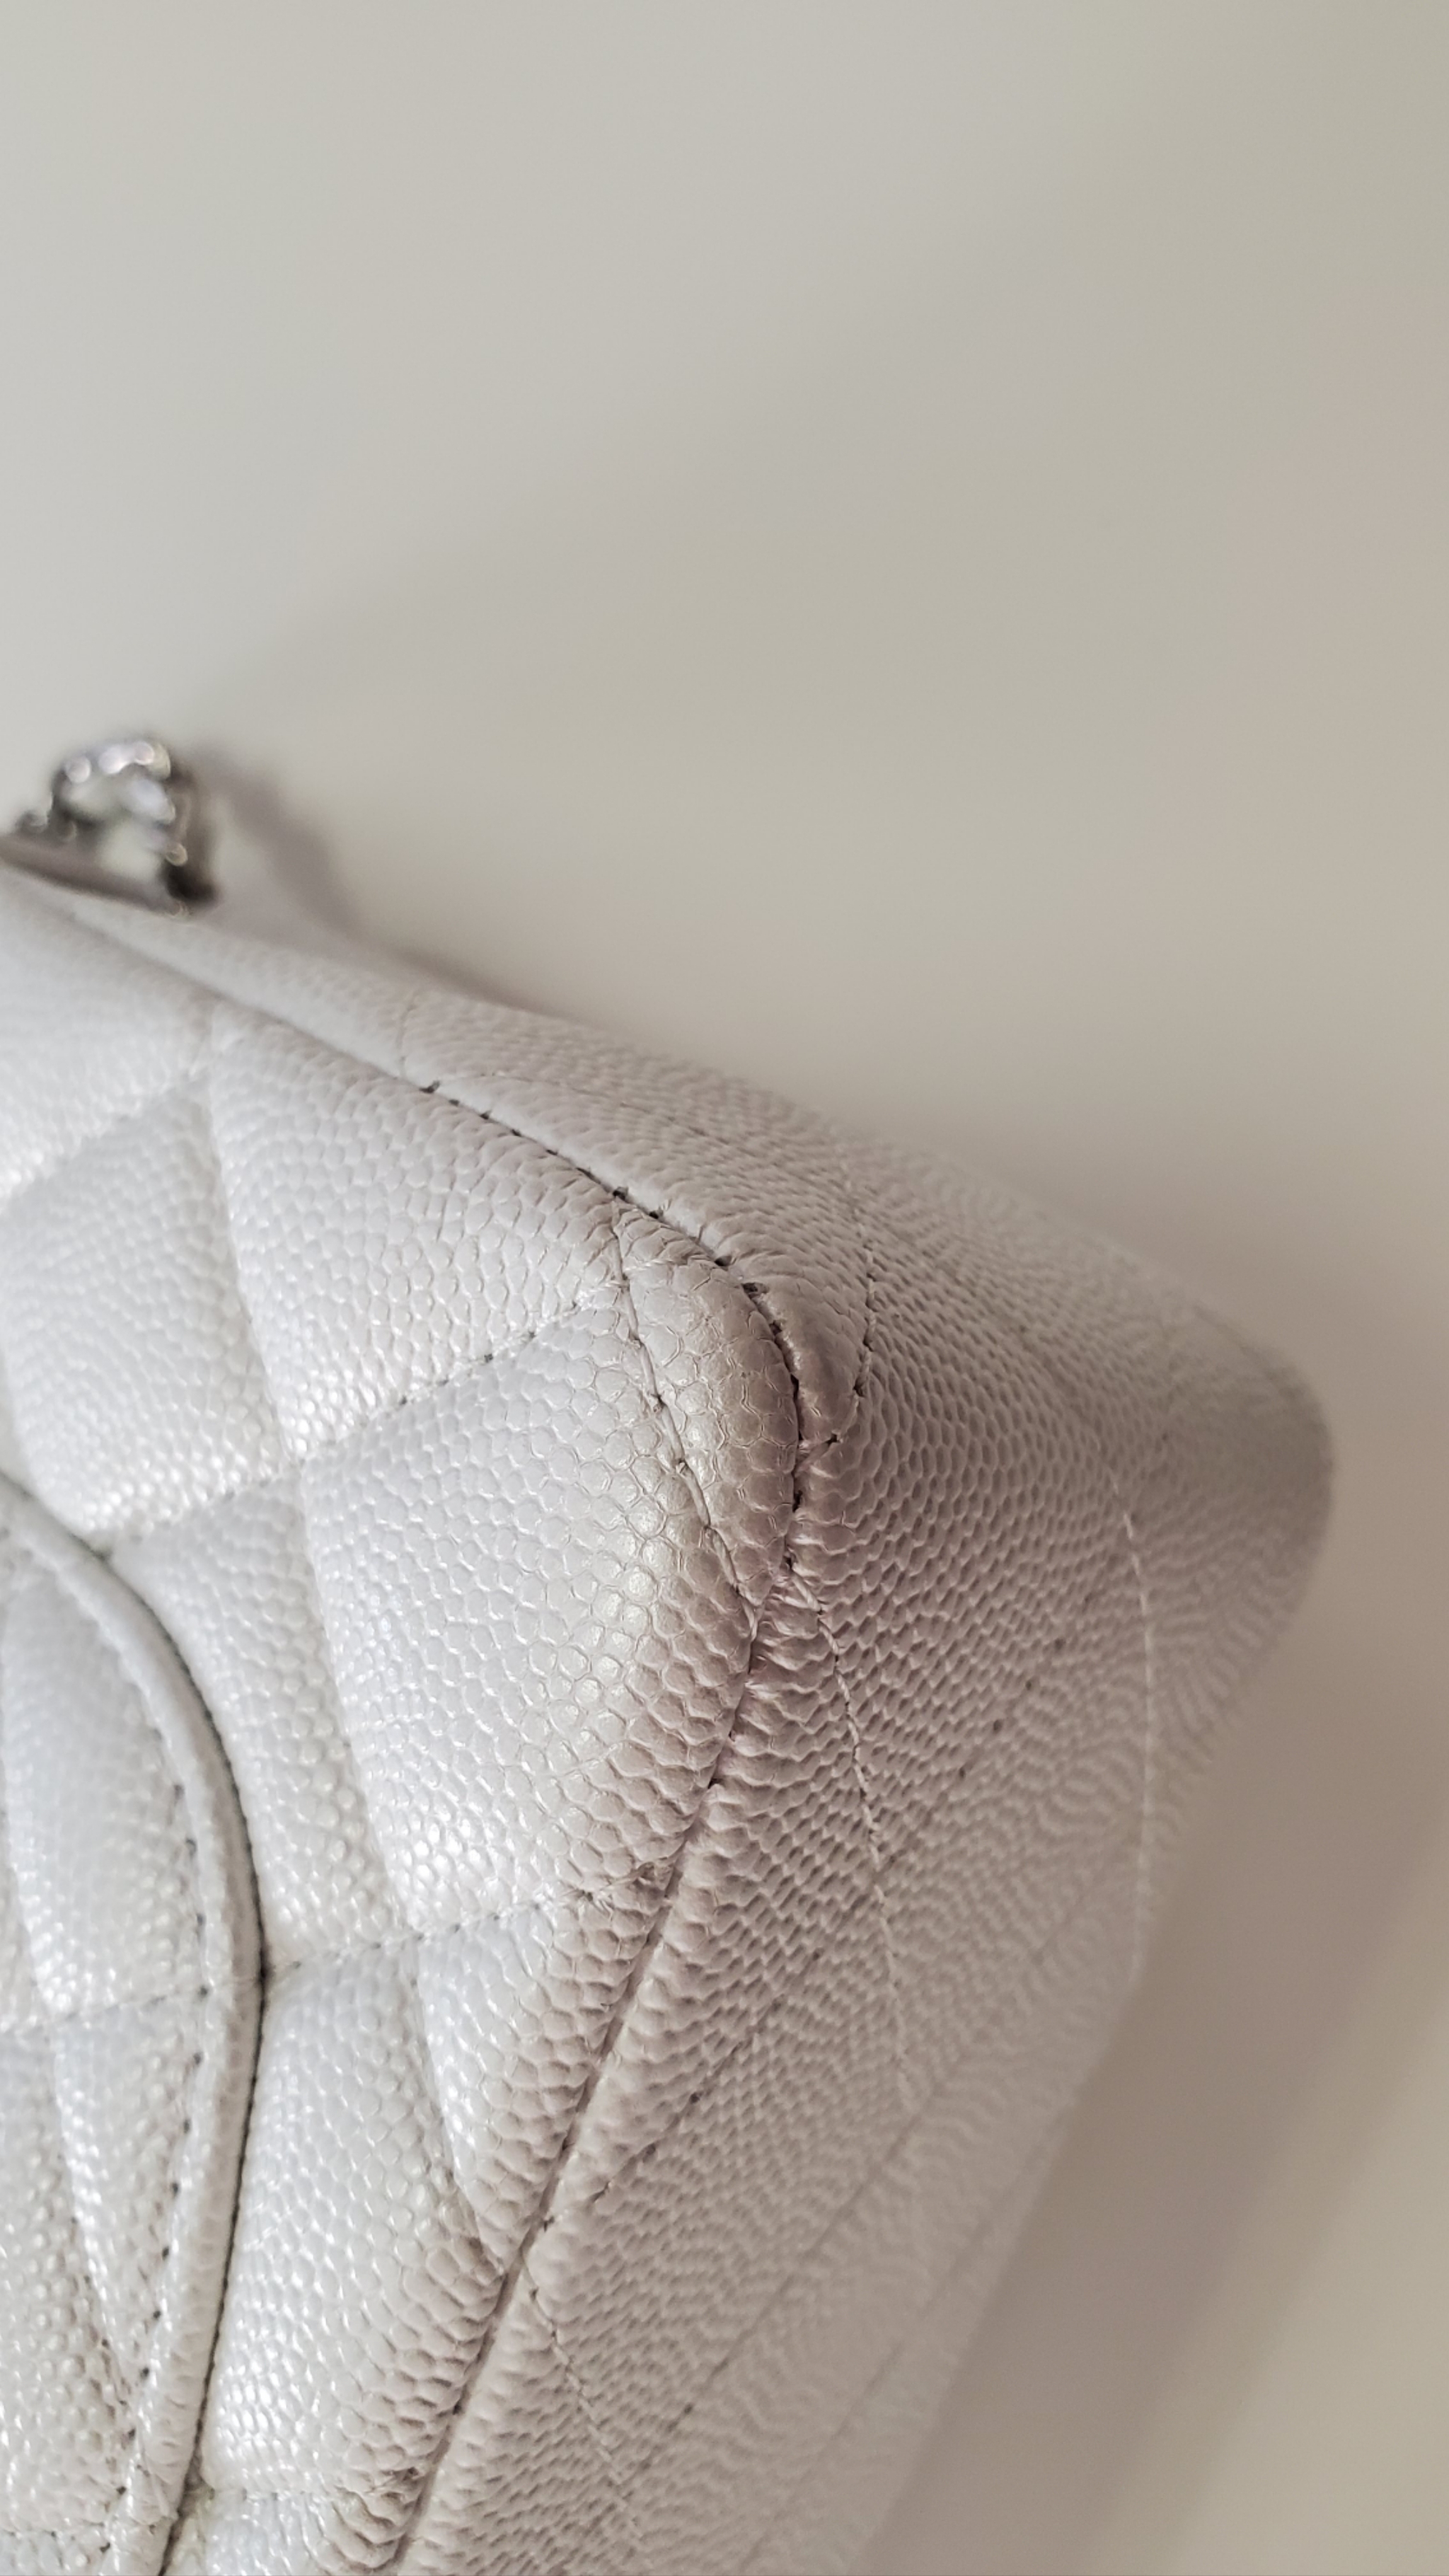 CHANEL Caviar Quilted Mini Top Handle Rectangular Flap White 694460